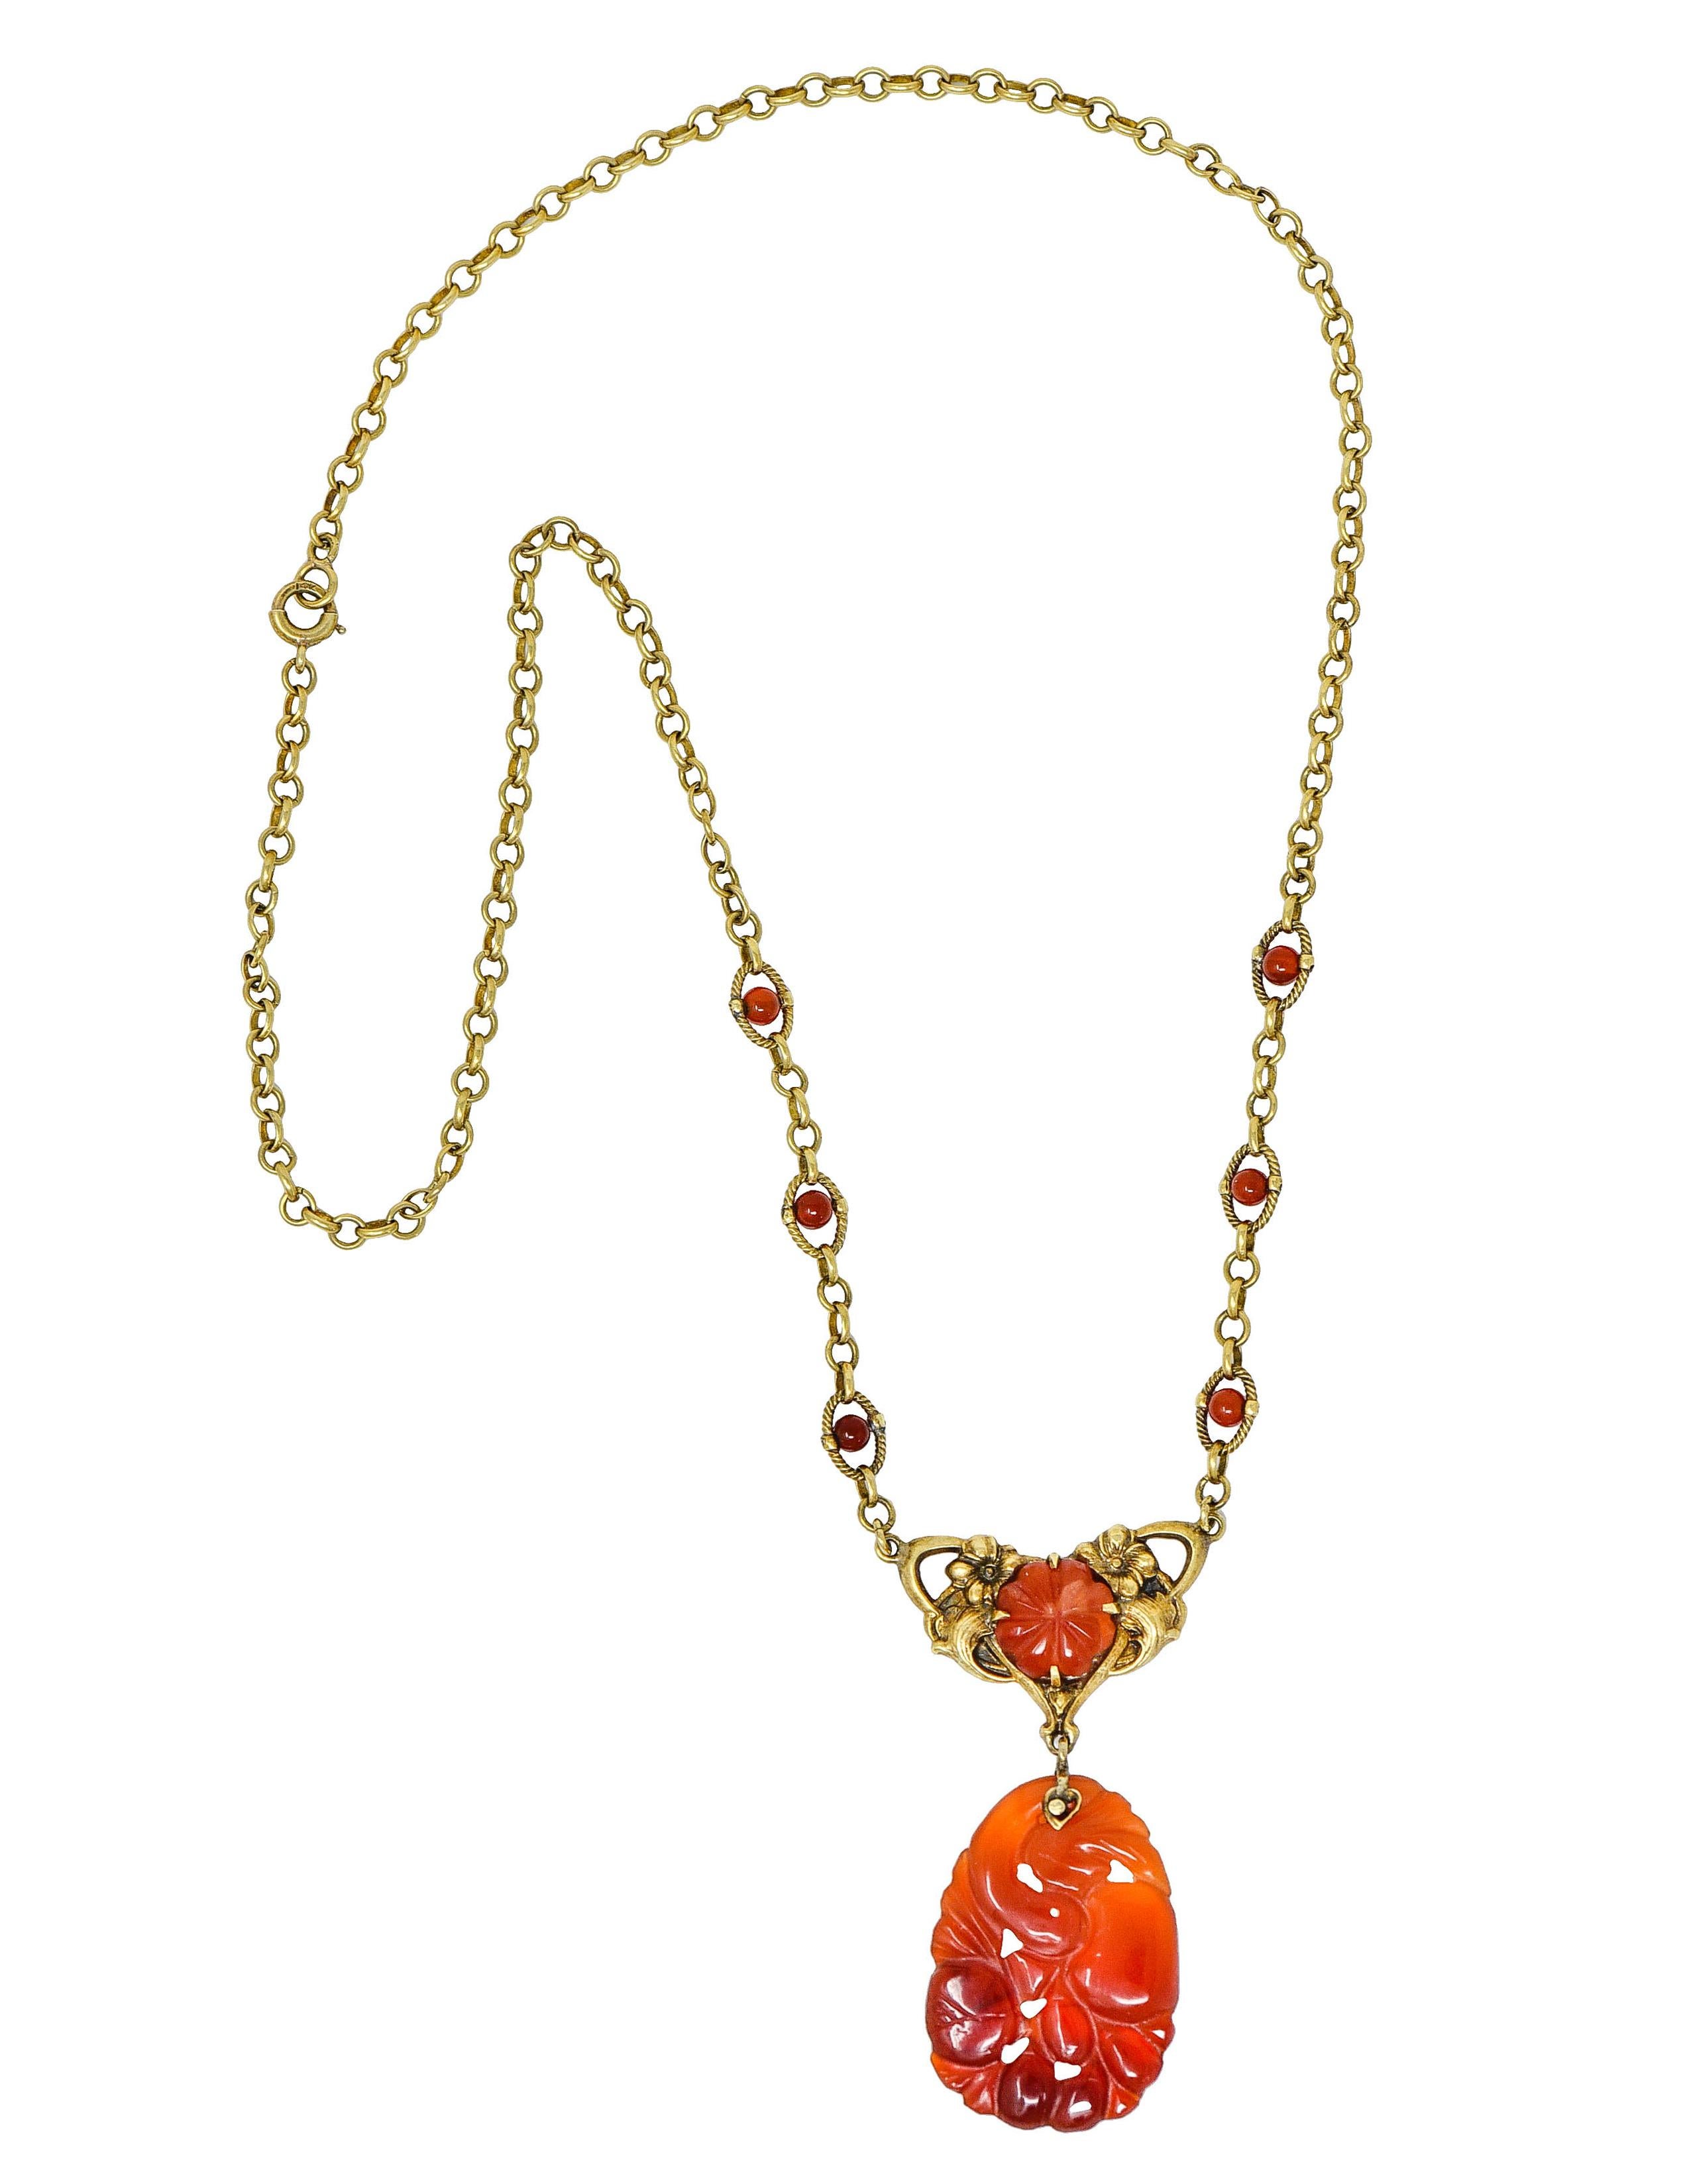 Antique cable chain necklace has six 2.5 mm carnelian bead stations with twisted rope surrounds

Featuring an ornate floral central station with a 9.0 mm pumpkin carved carnelian cabochon

Suspending an oval carnelian drop deeply carved with floral